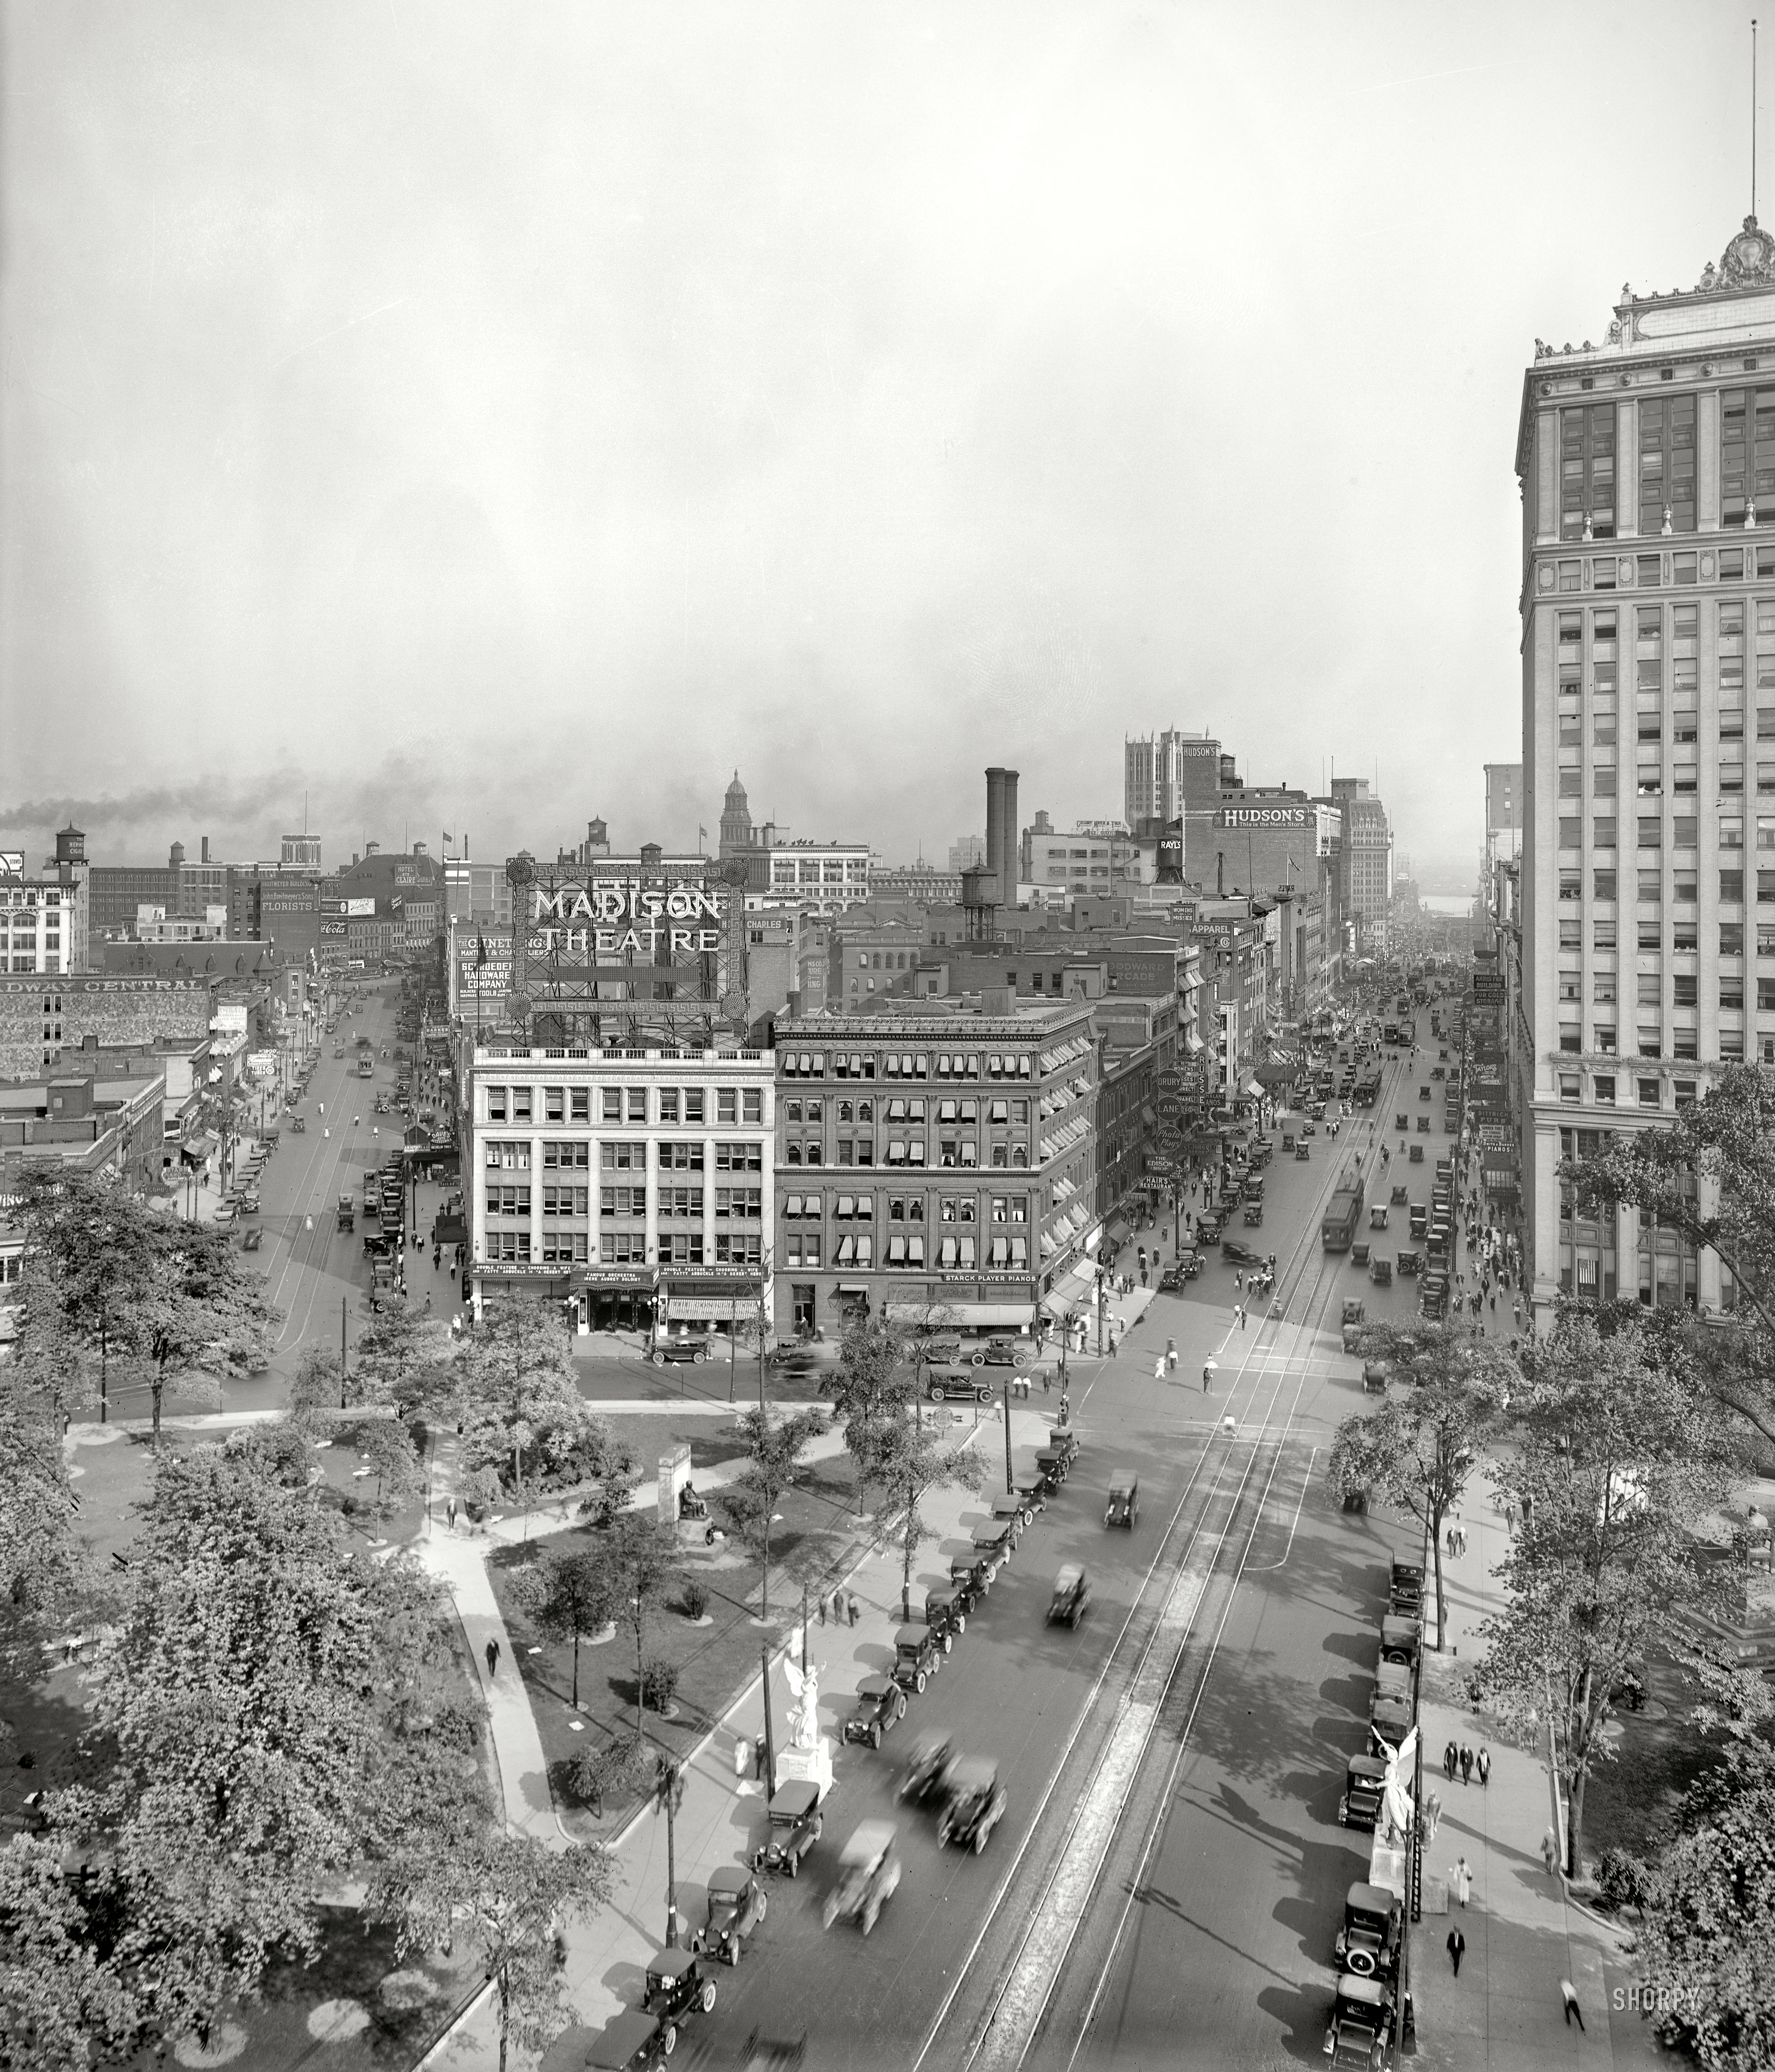 Detroit circa 1919. "View of Madison Theatre and Woodward Avenue." Now playing: "Choosing a Wife" and Fatty Arbuckle in "A Desert Hero." 8x10 inch dry plate glass negative, Detroit Publishing Company. View full size.